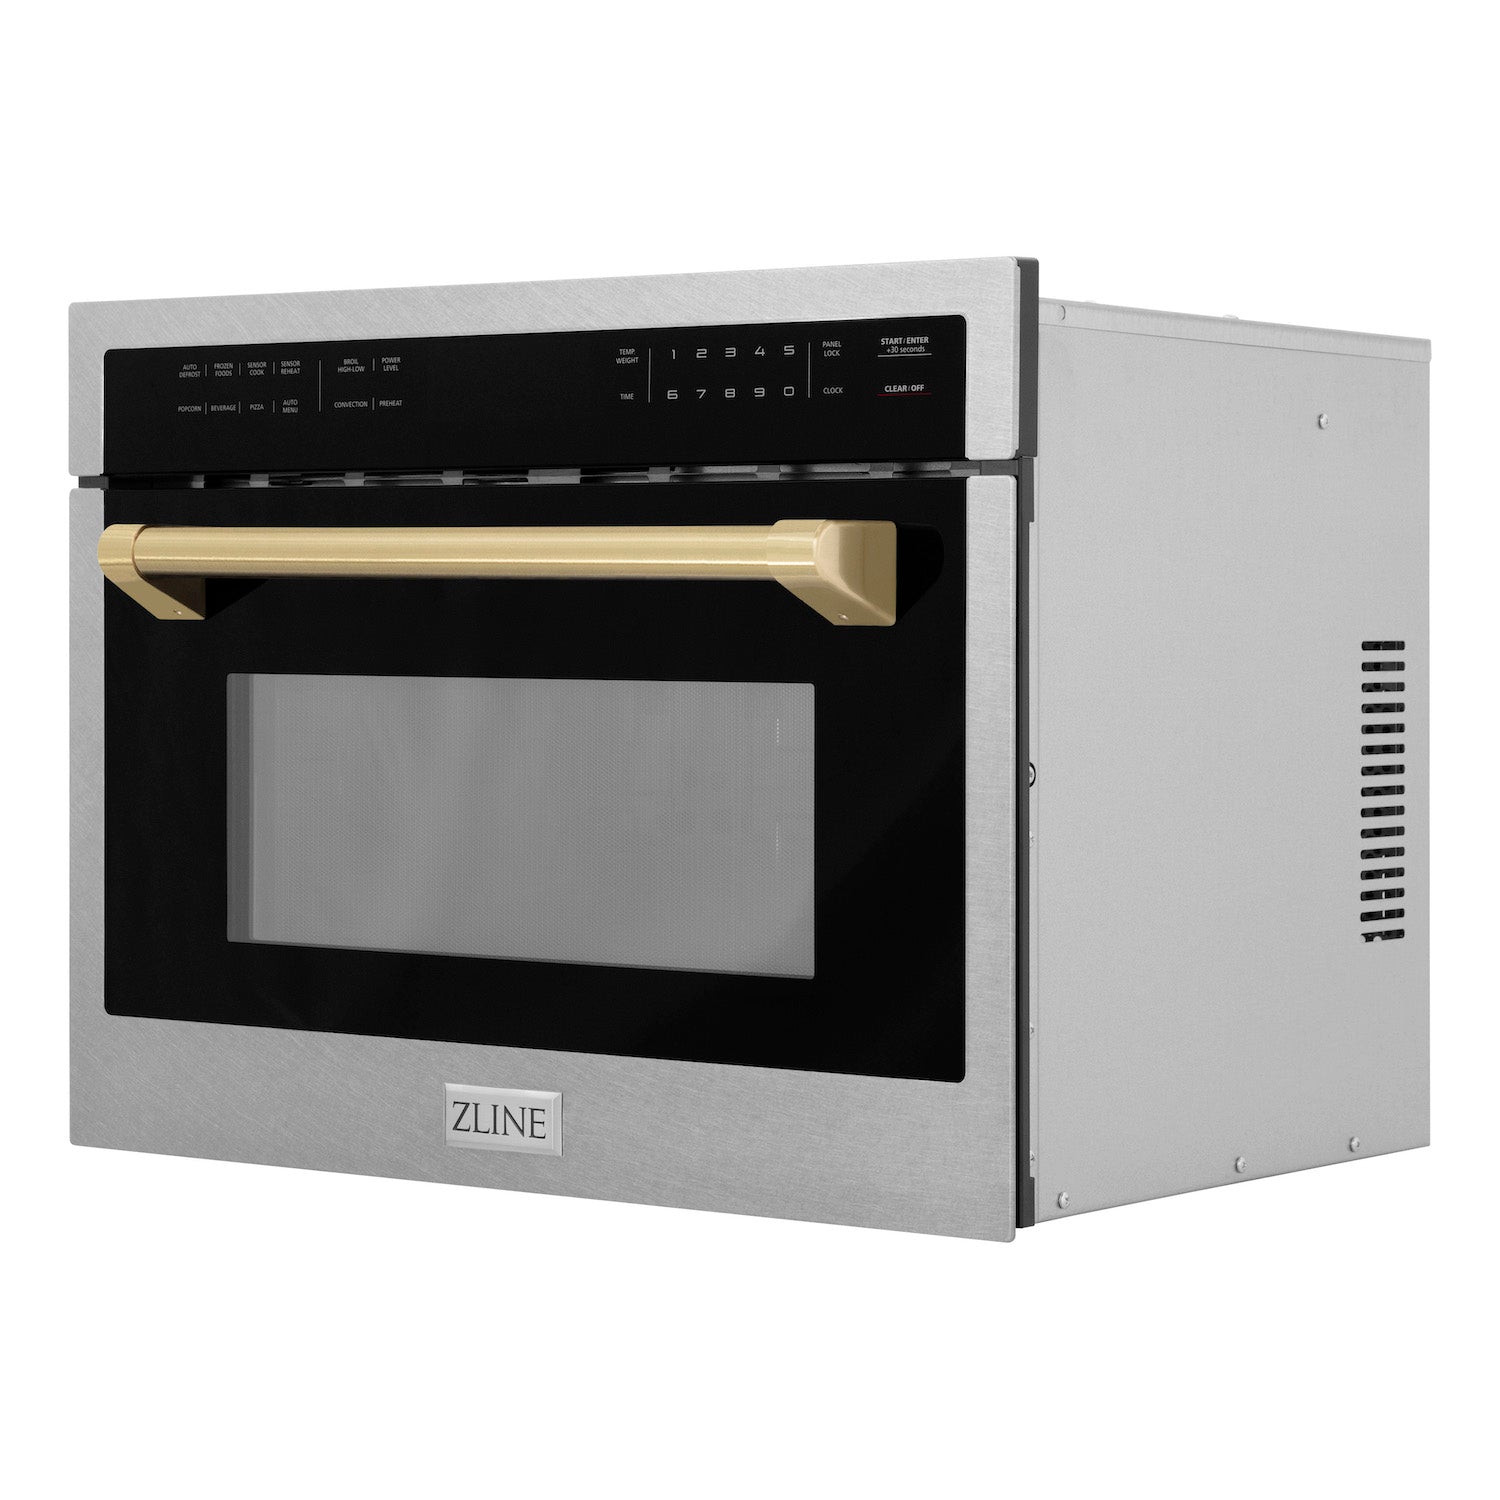 ZLINE Autograph Edition 24 in. 1.6 cu ft. Built-in Convection Microwave Oven in DuraSnow Stainless Steel with Champagne Bronze Accents side with door closed.